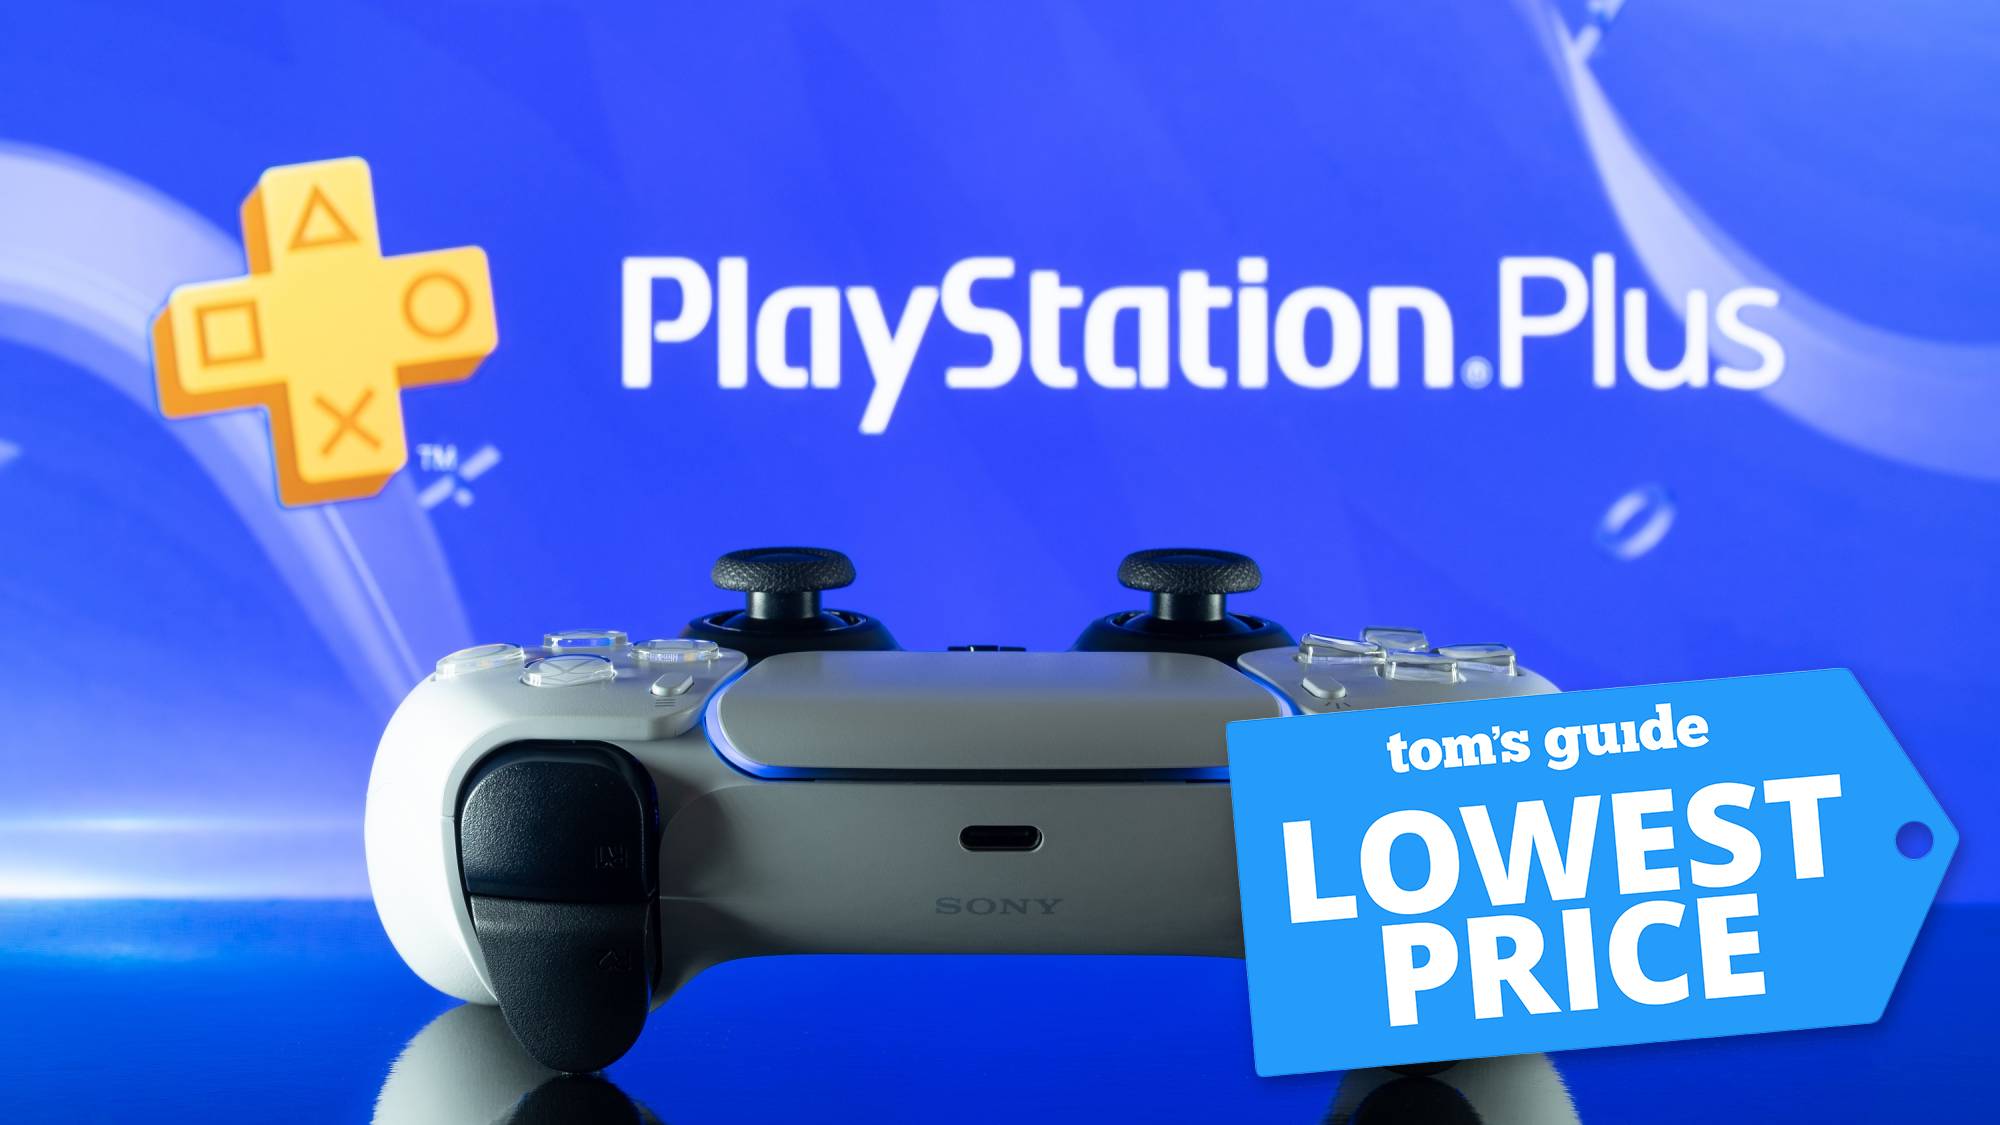 PS Plus Premium lets you stream PS5 games at 4K, but there's a catch